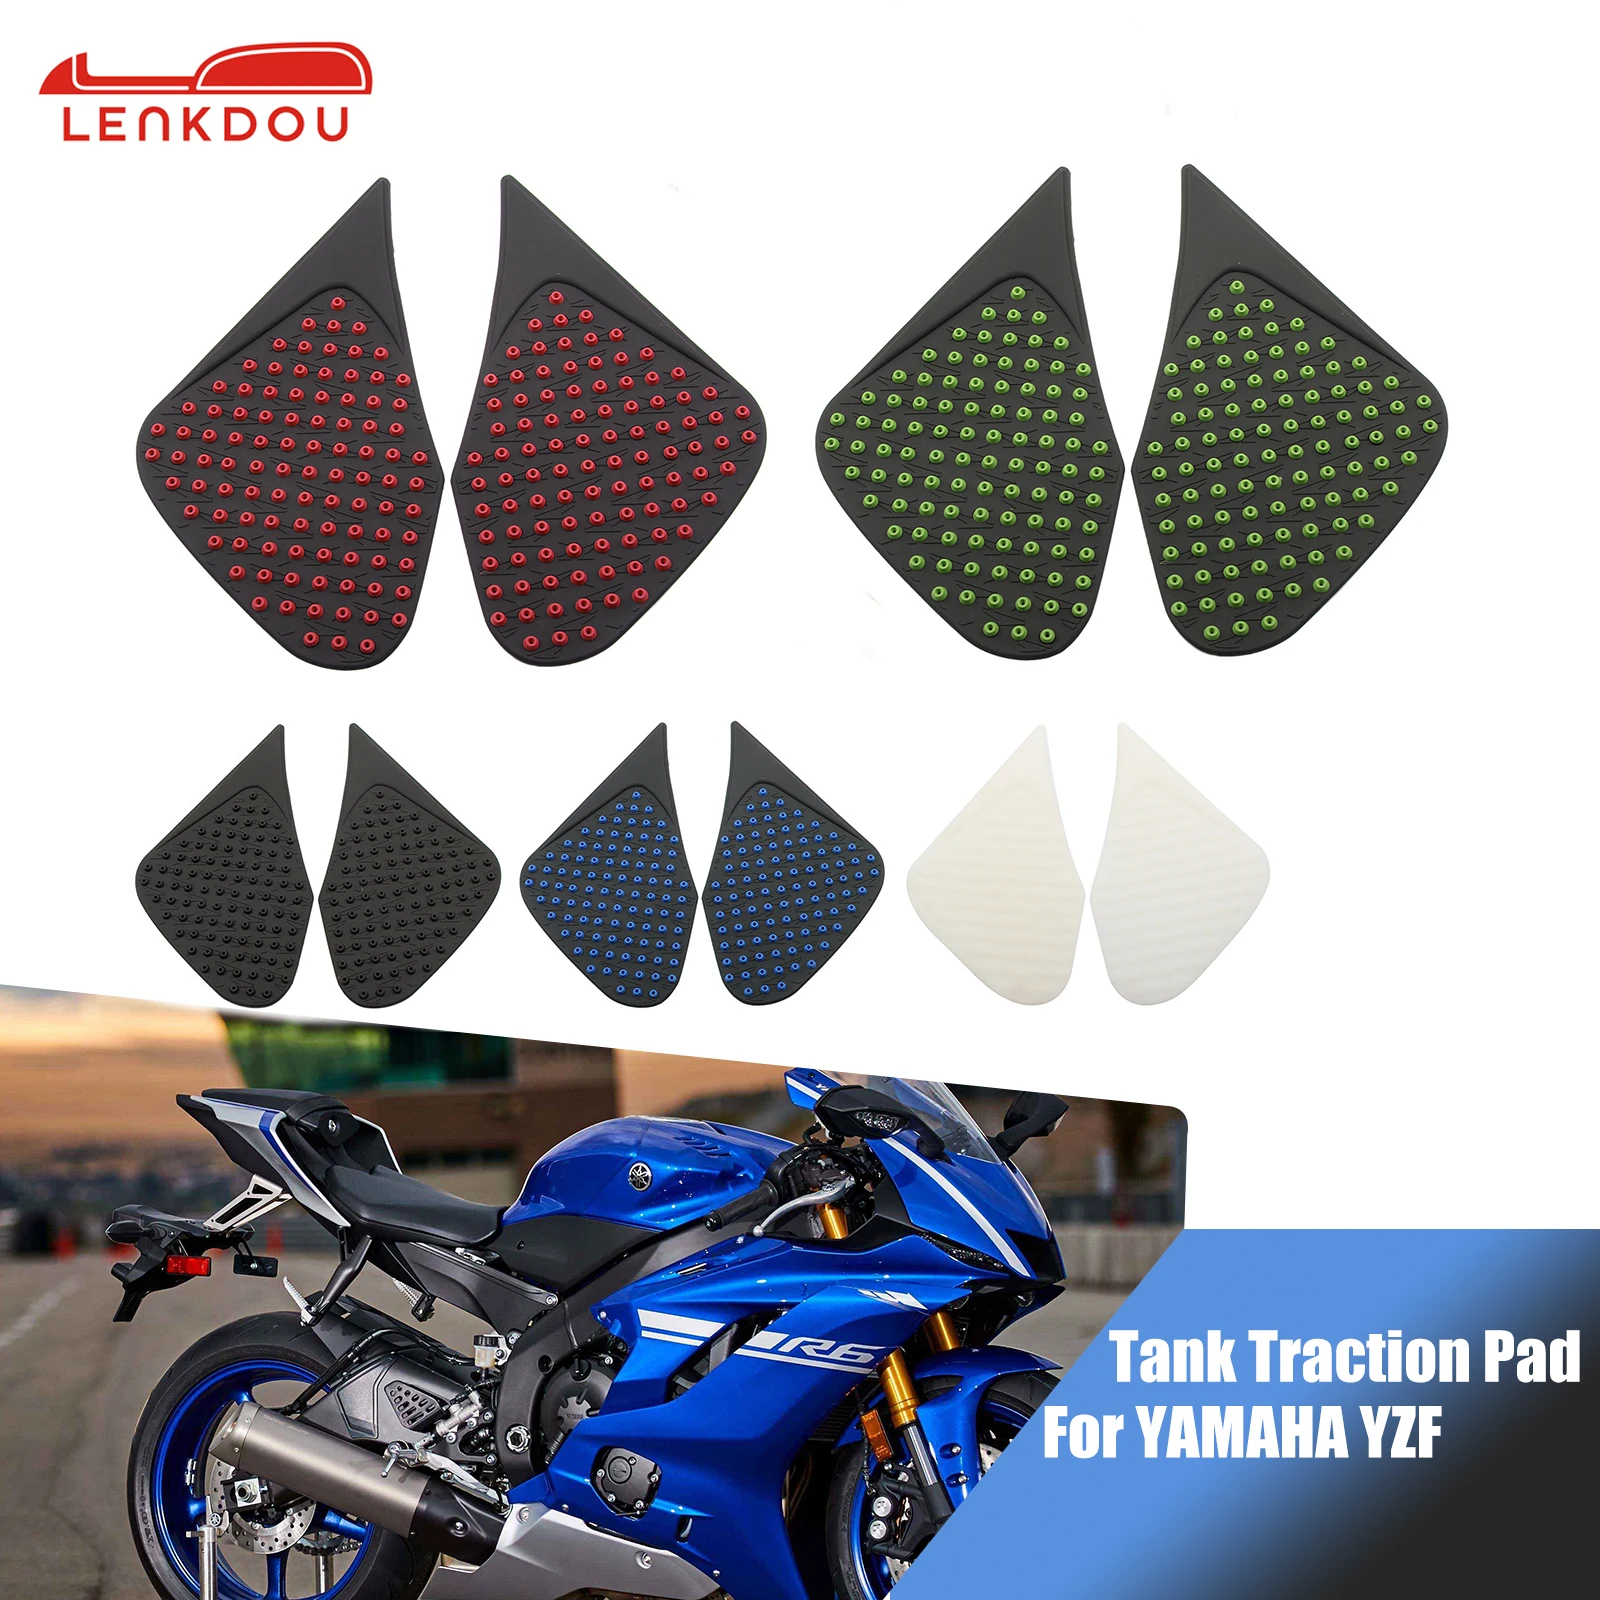 Tank Traction Pad For YAMAHA YZF YZ-F R1 R3 R6 R25 R125 Motorcycle Accessoies Anti Slip Side Gas Knee Grip Protector Sticker